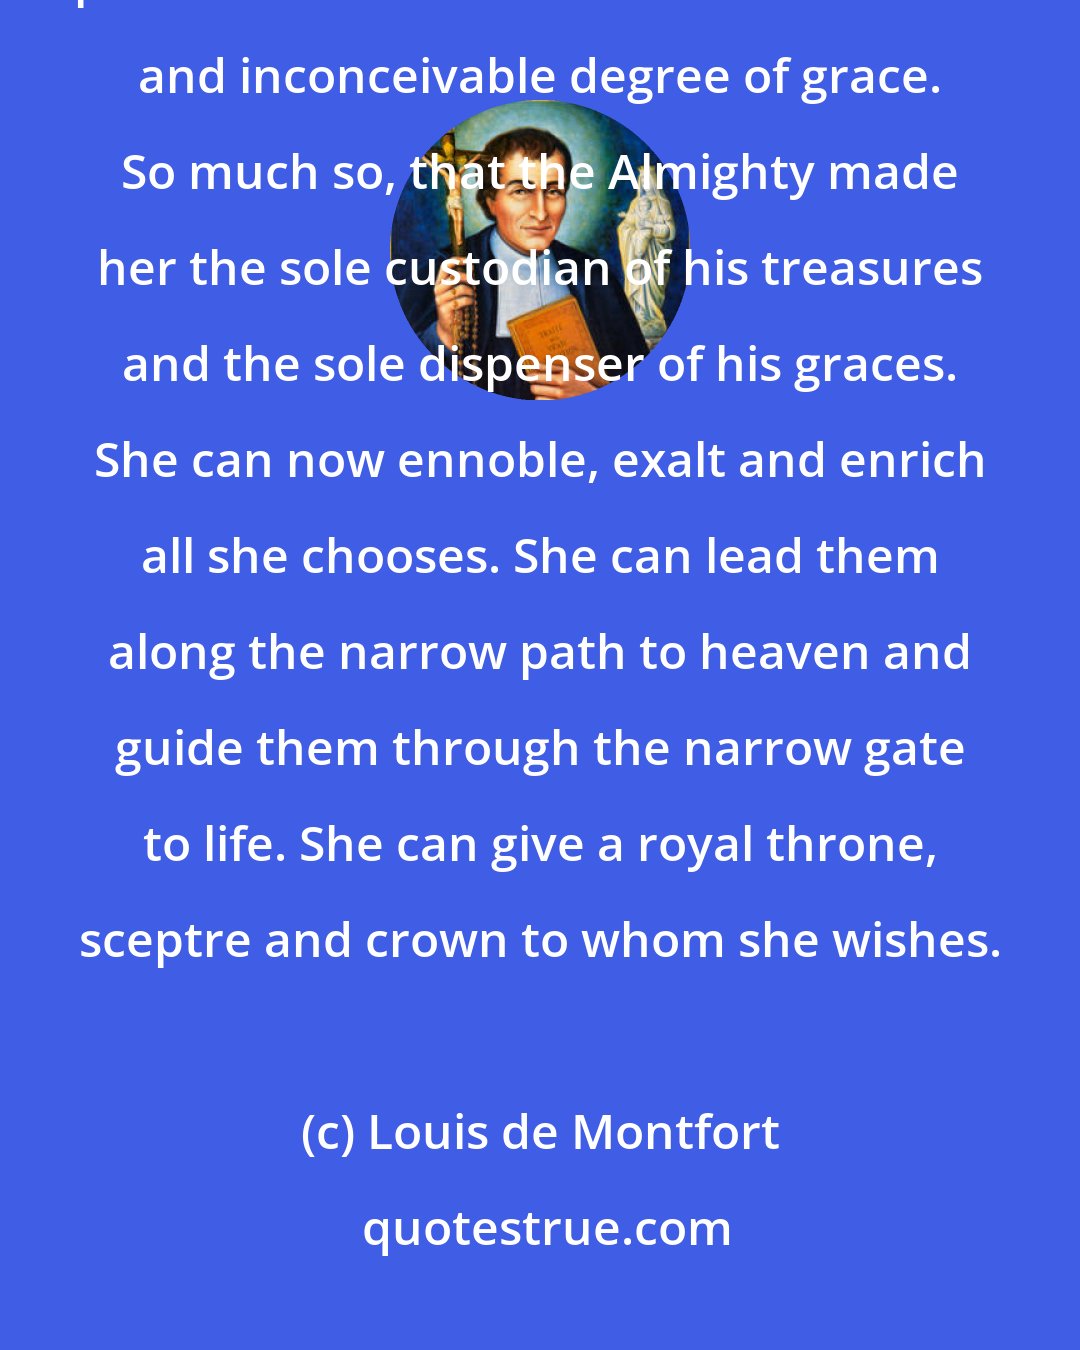 Louis de Montfort: From day to day, from moment to moment, she increased so much this twofold plenitude that she attained an immense and inconceivable degree of grace. So much so, that the Almighty made her the sole custodian of his treasures and the sole dispenser of his graces. She can now ennoble, exalt and enrich all she chooses. She can lead them along the narrow path to heaven and guide them through the narrow gate to life. She can give a royal throne, sceptre and crown to whom she wishes.